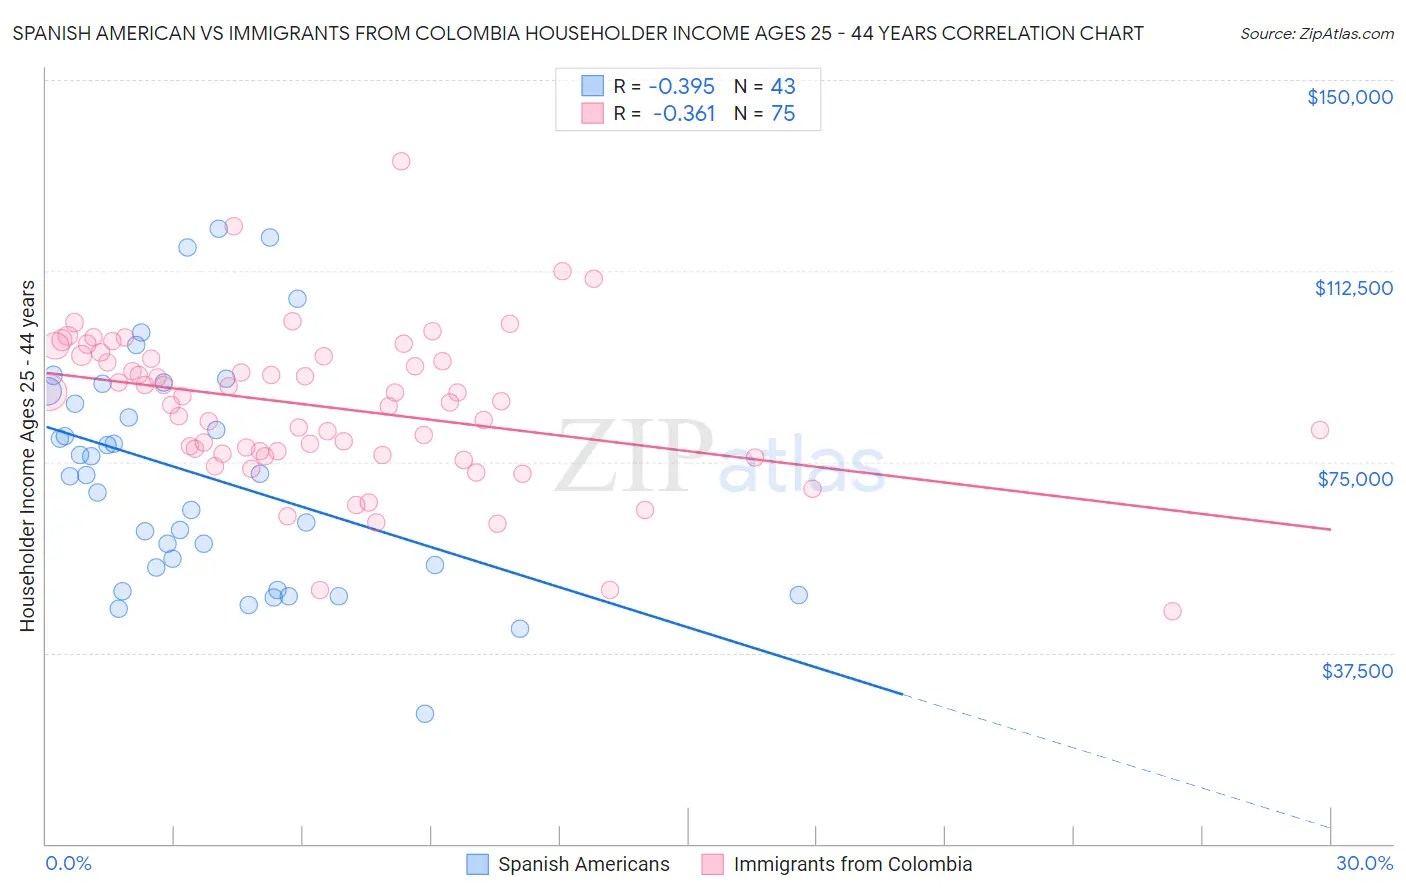 Spanish American vs Immigrants from Colombia Householder Income Ages 25 - 44 years